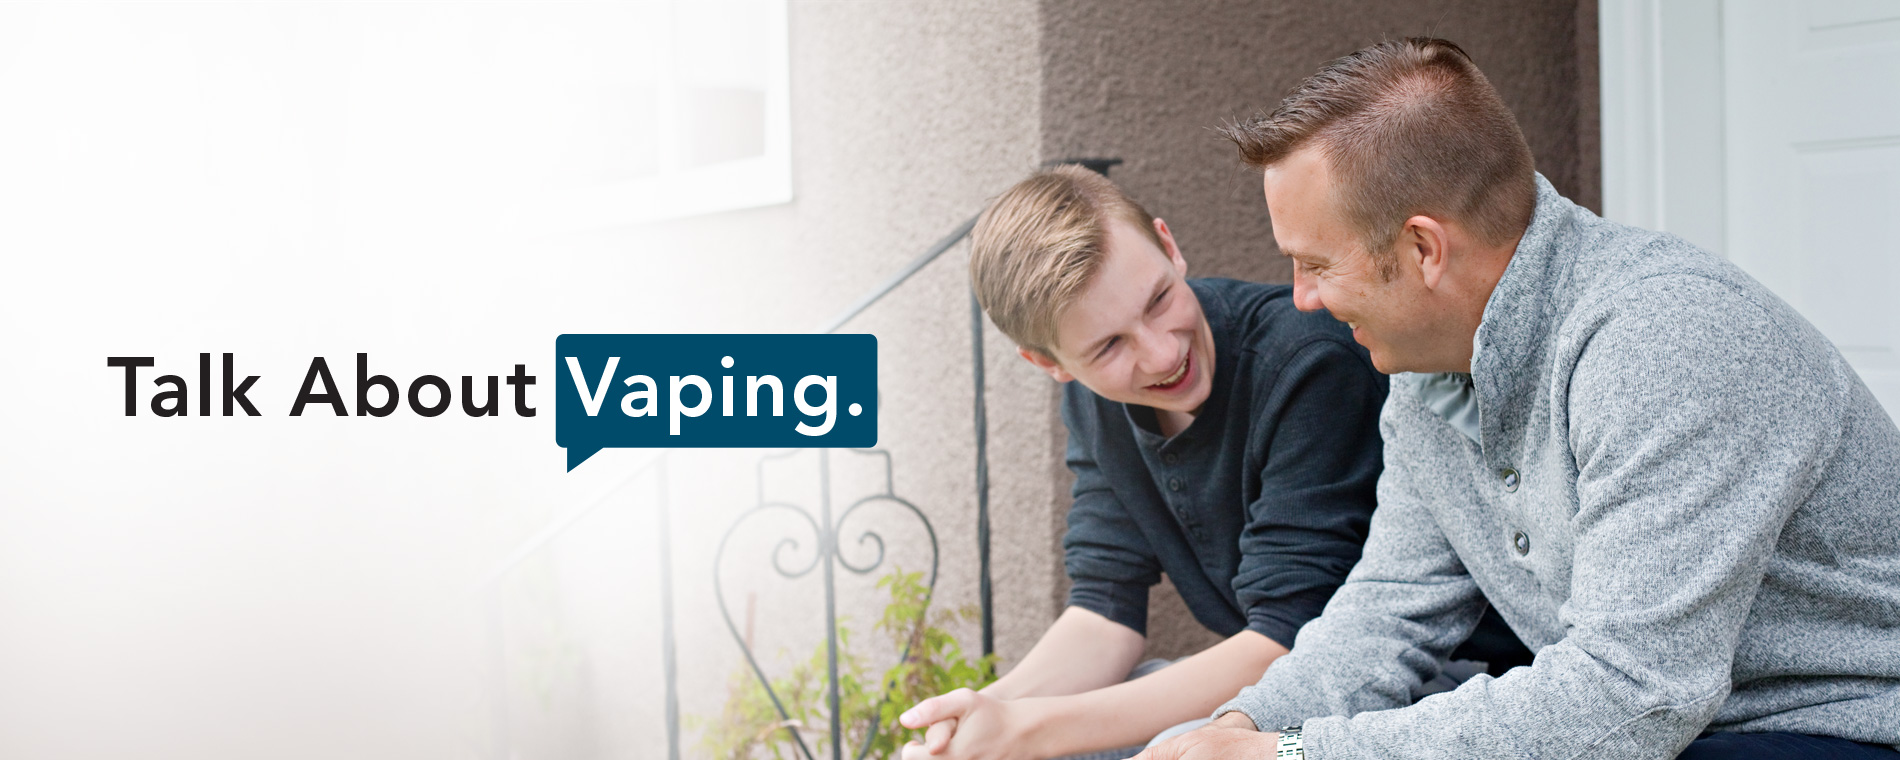 Talk to Your Student About Vaping Beach Cities Health